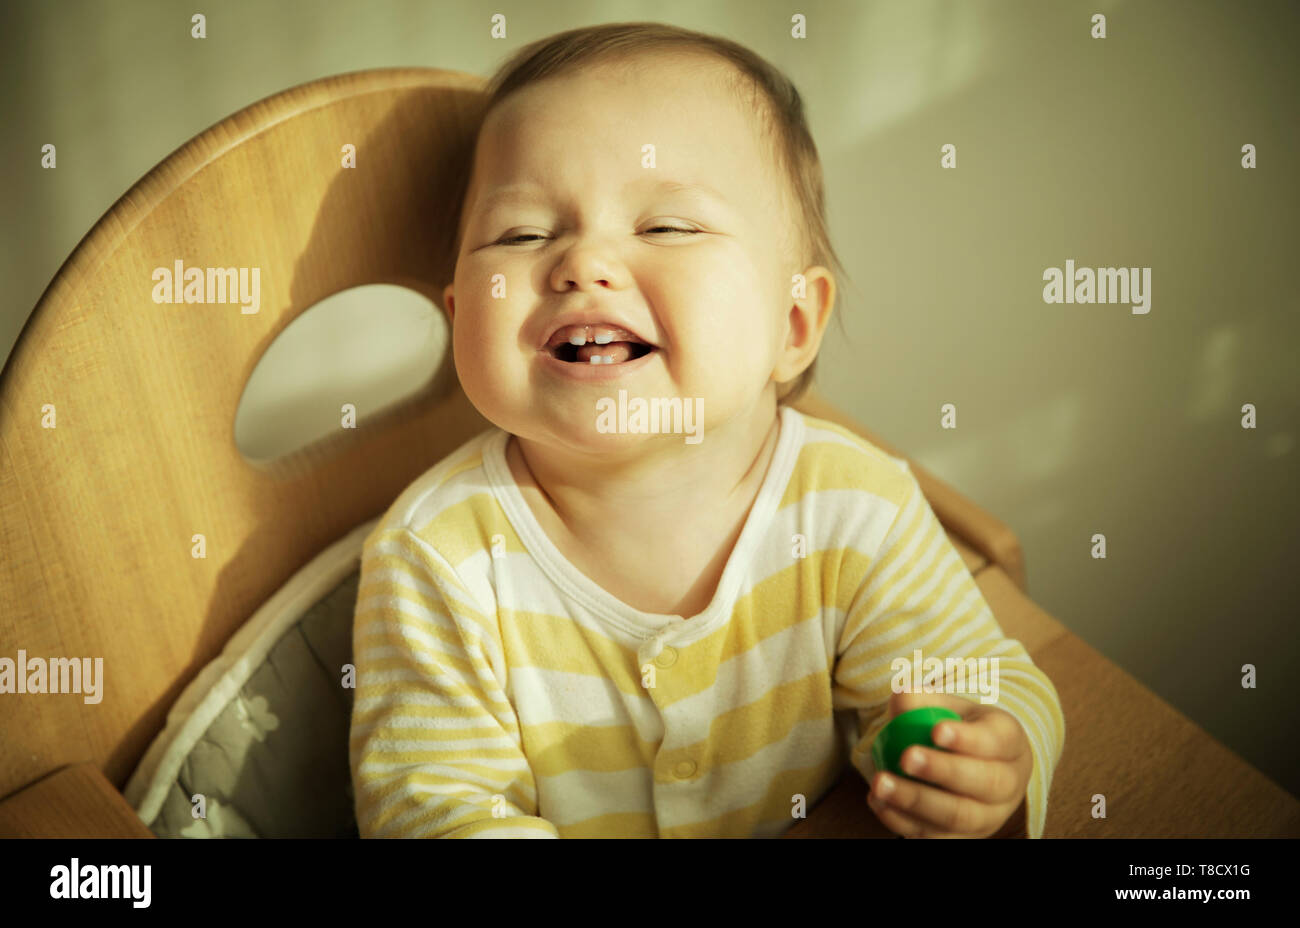 Cute baby smiling Stock Photo